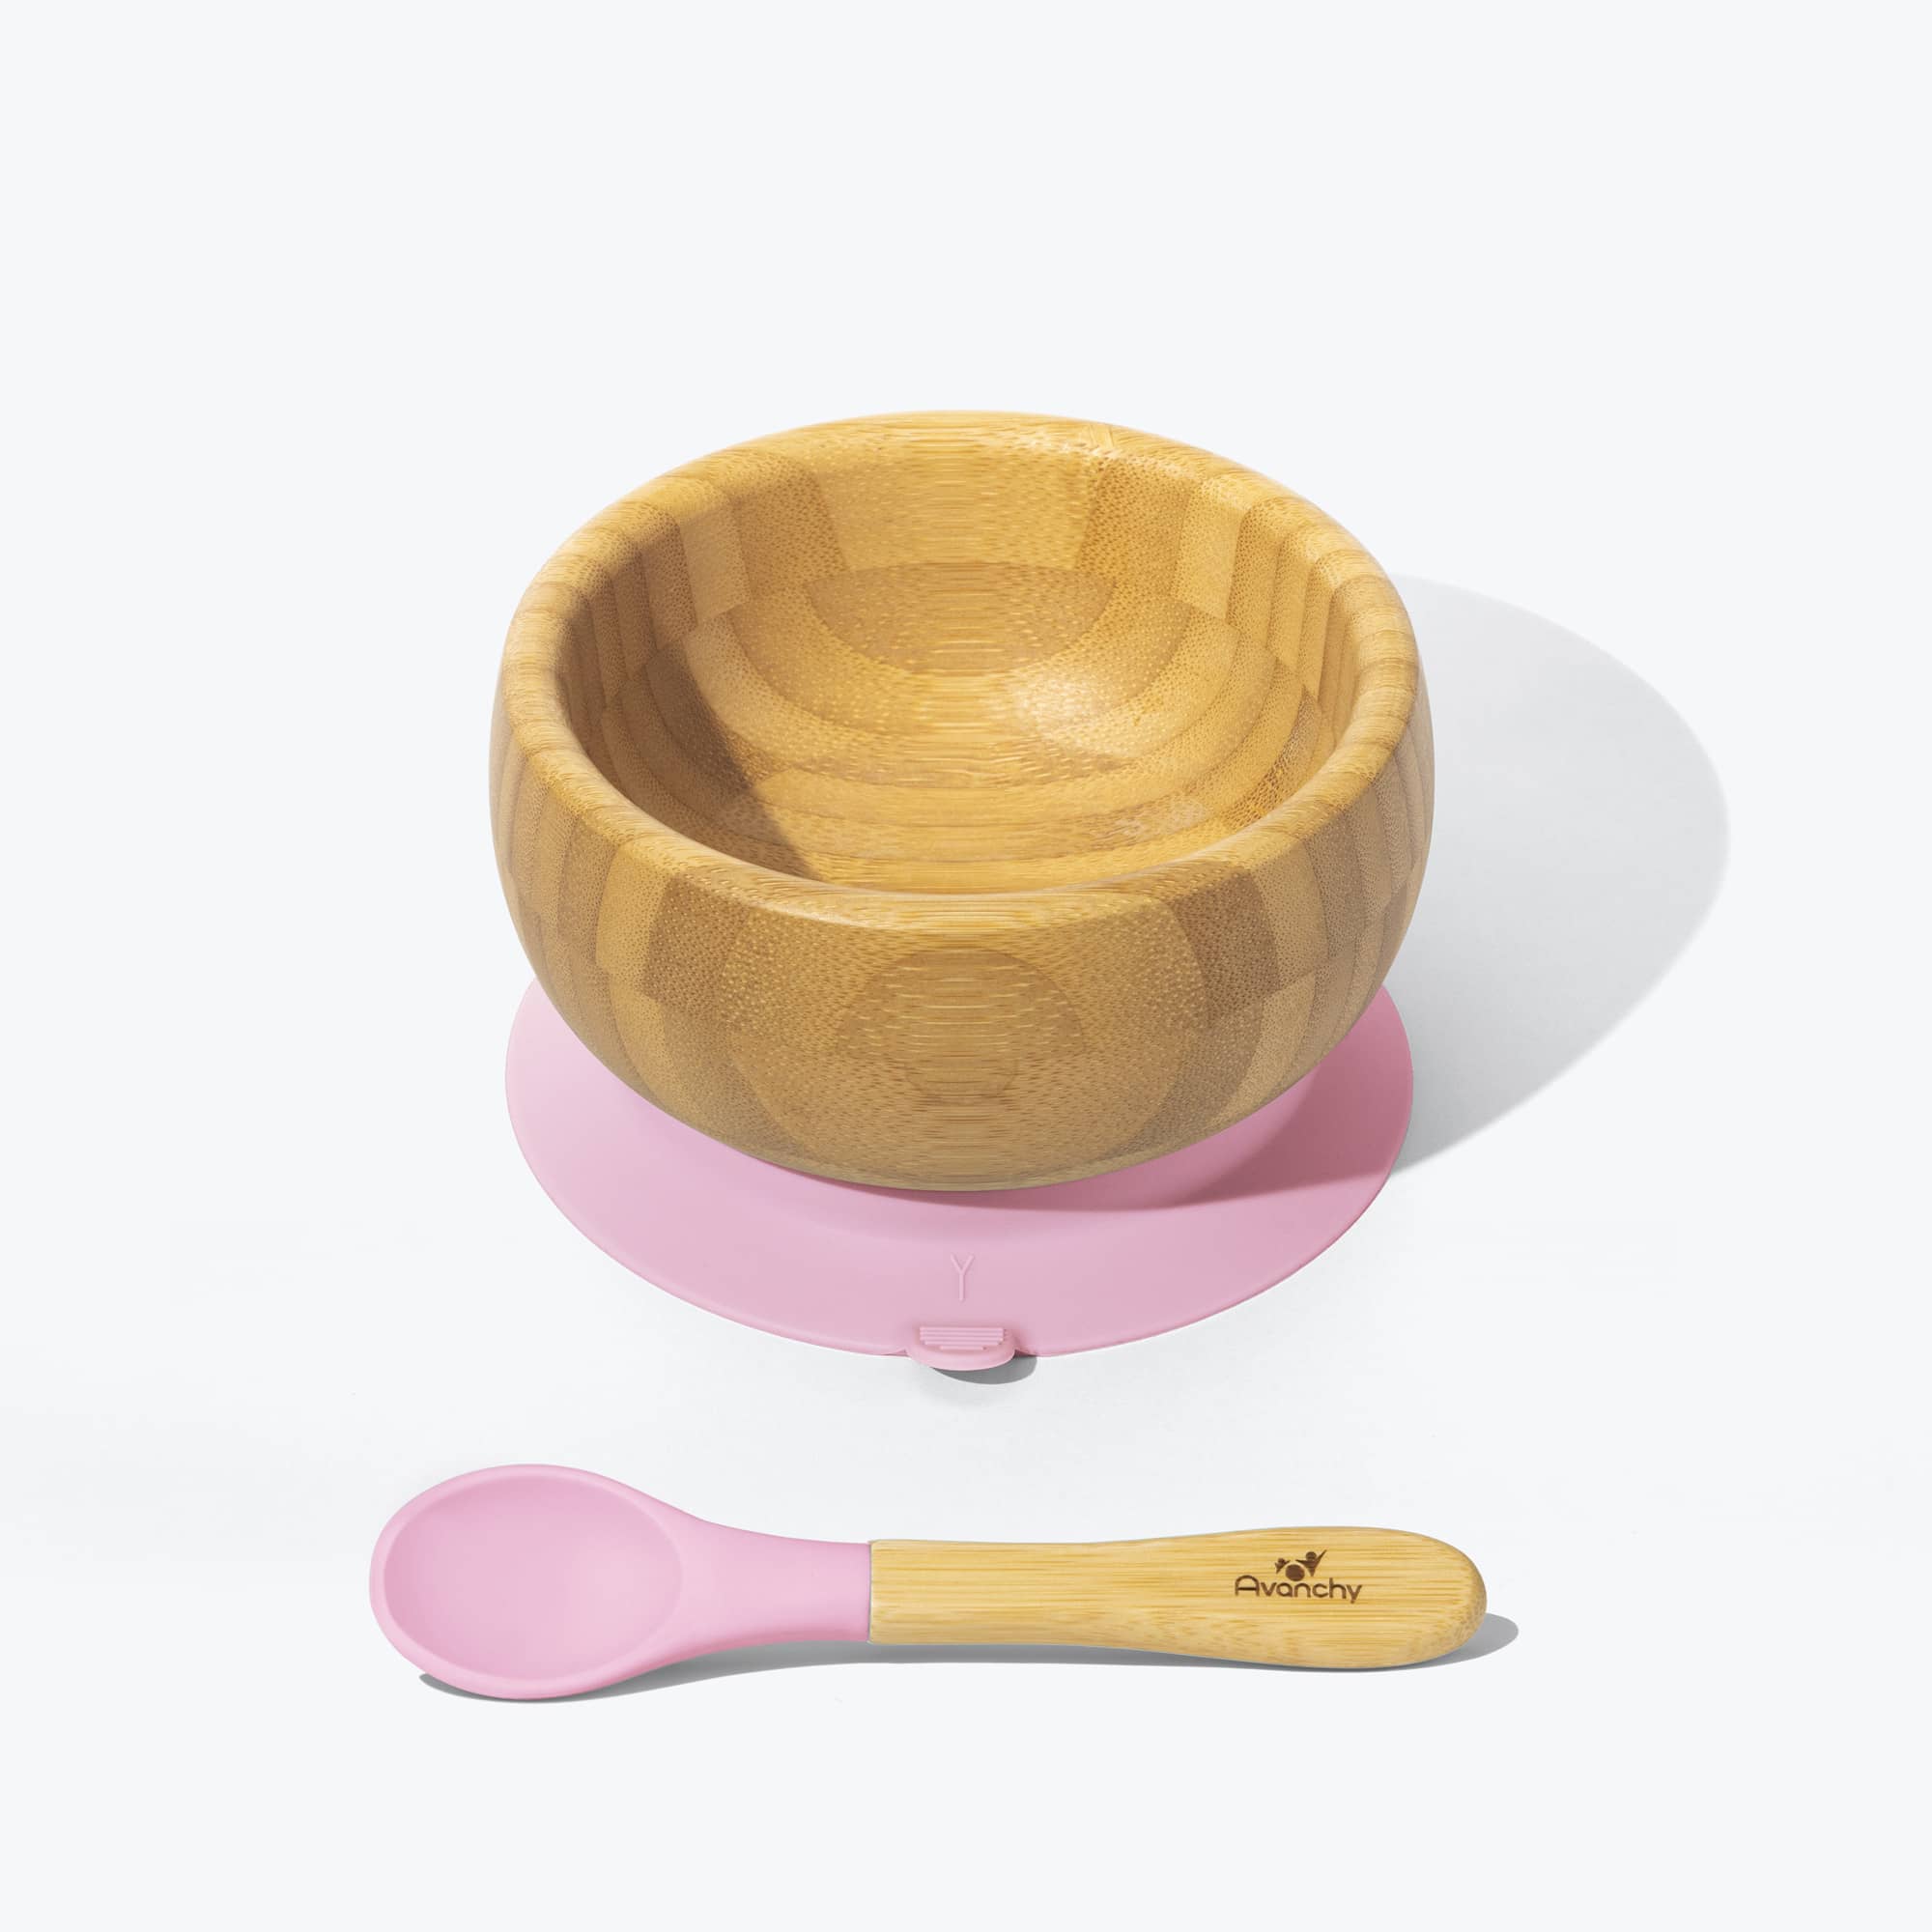 Avanchy Bamboo Suction Bowl and Spoon